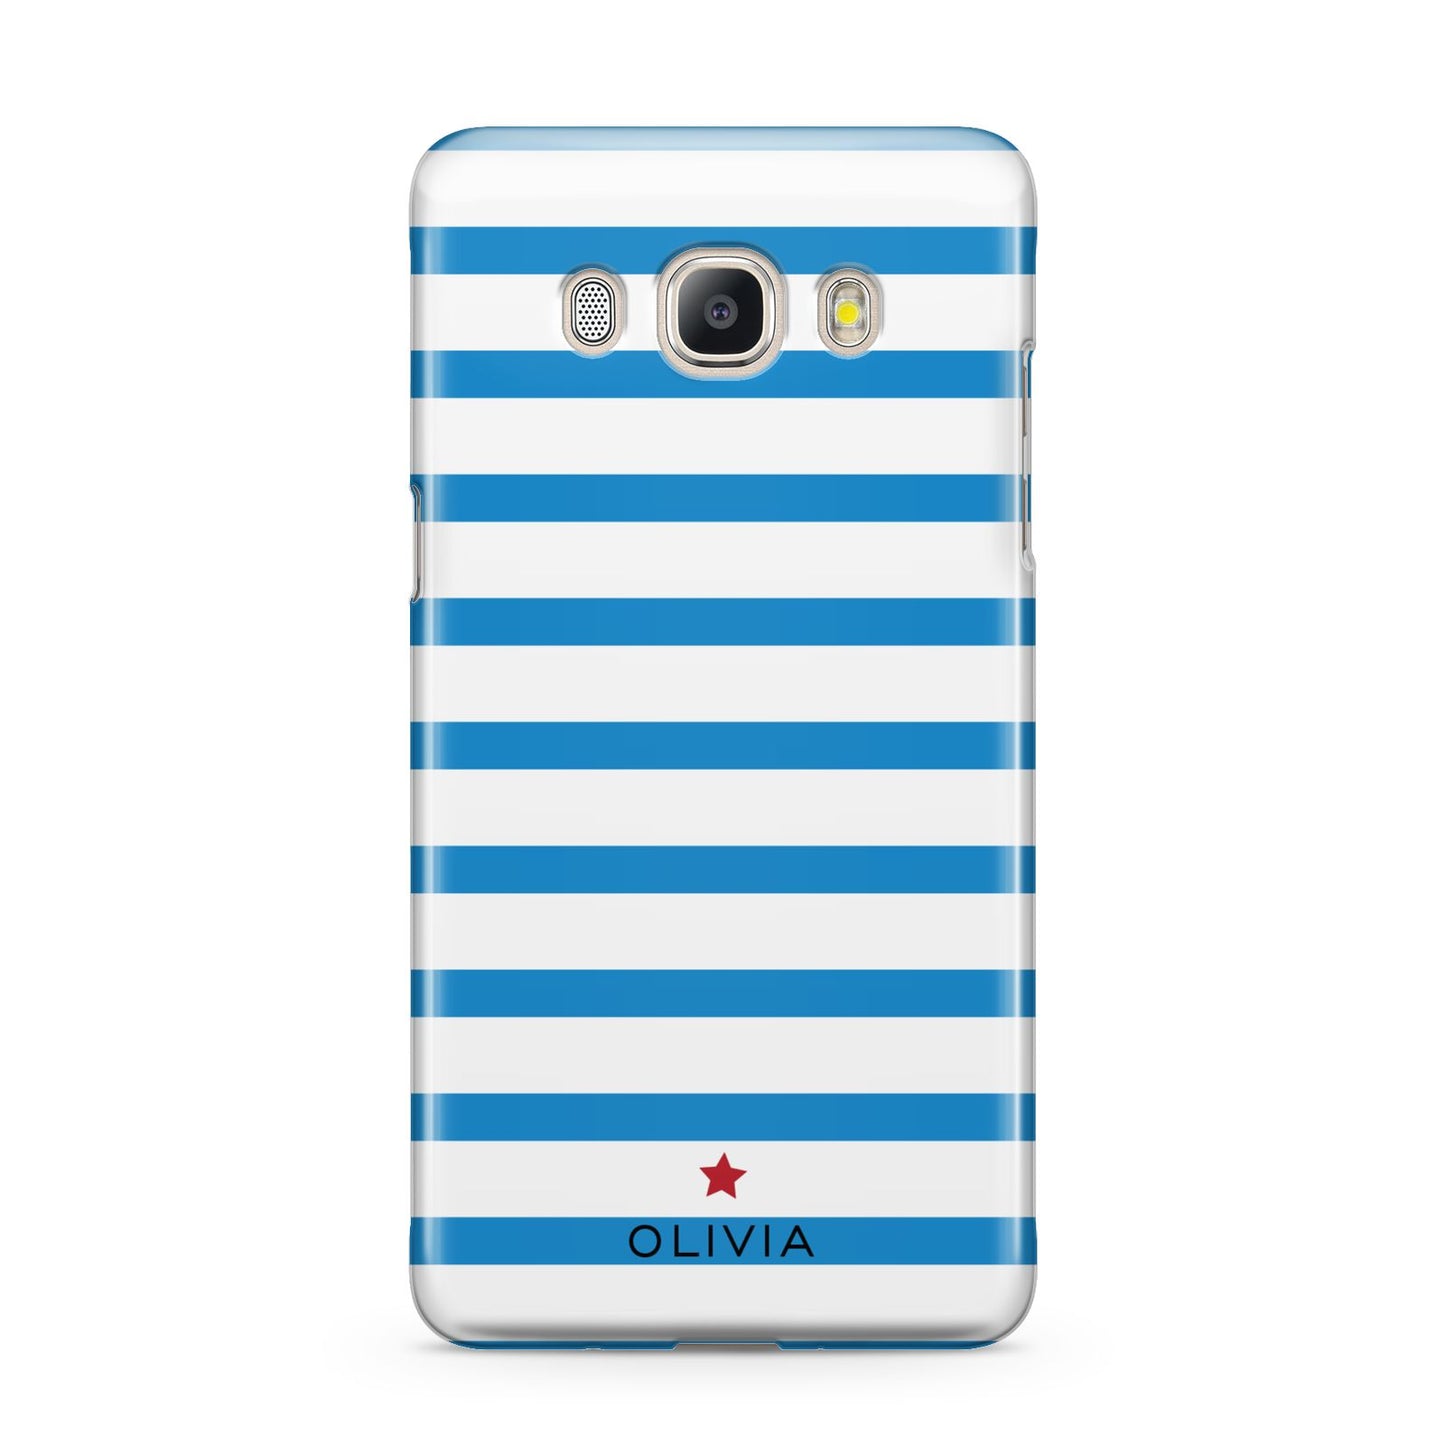 Personalised Name Blue White Samsung Galaxy J5 2016 Case